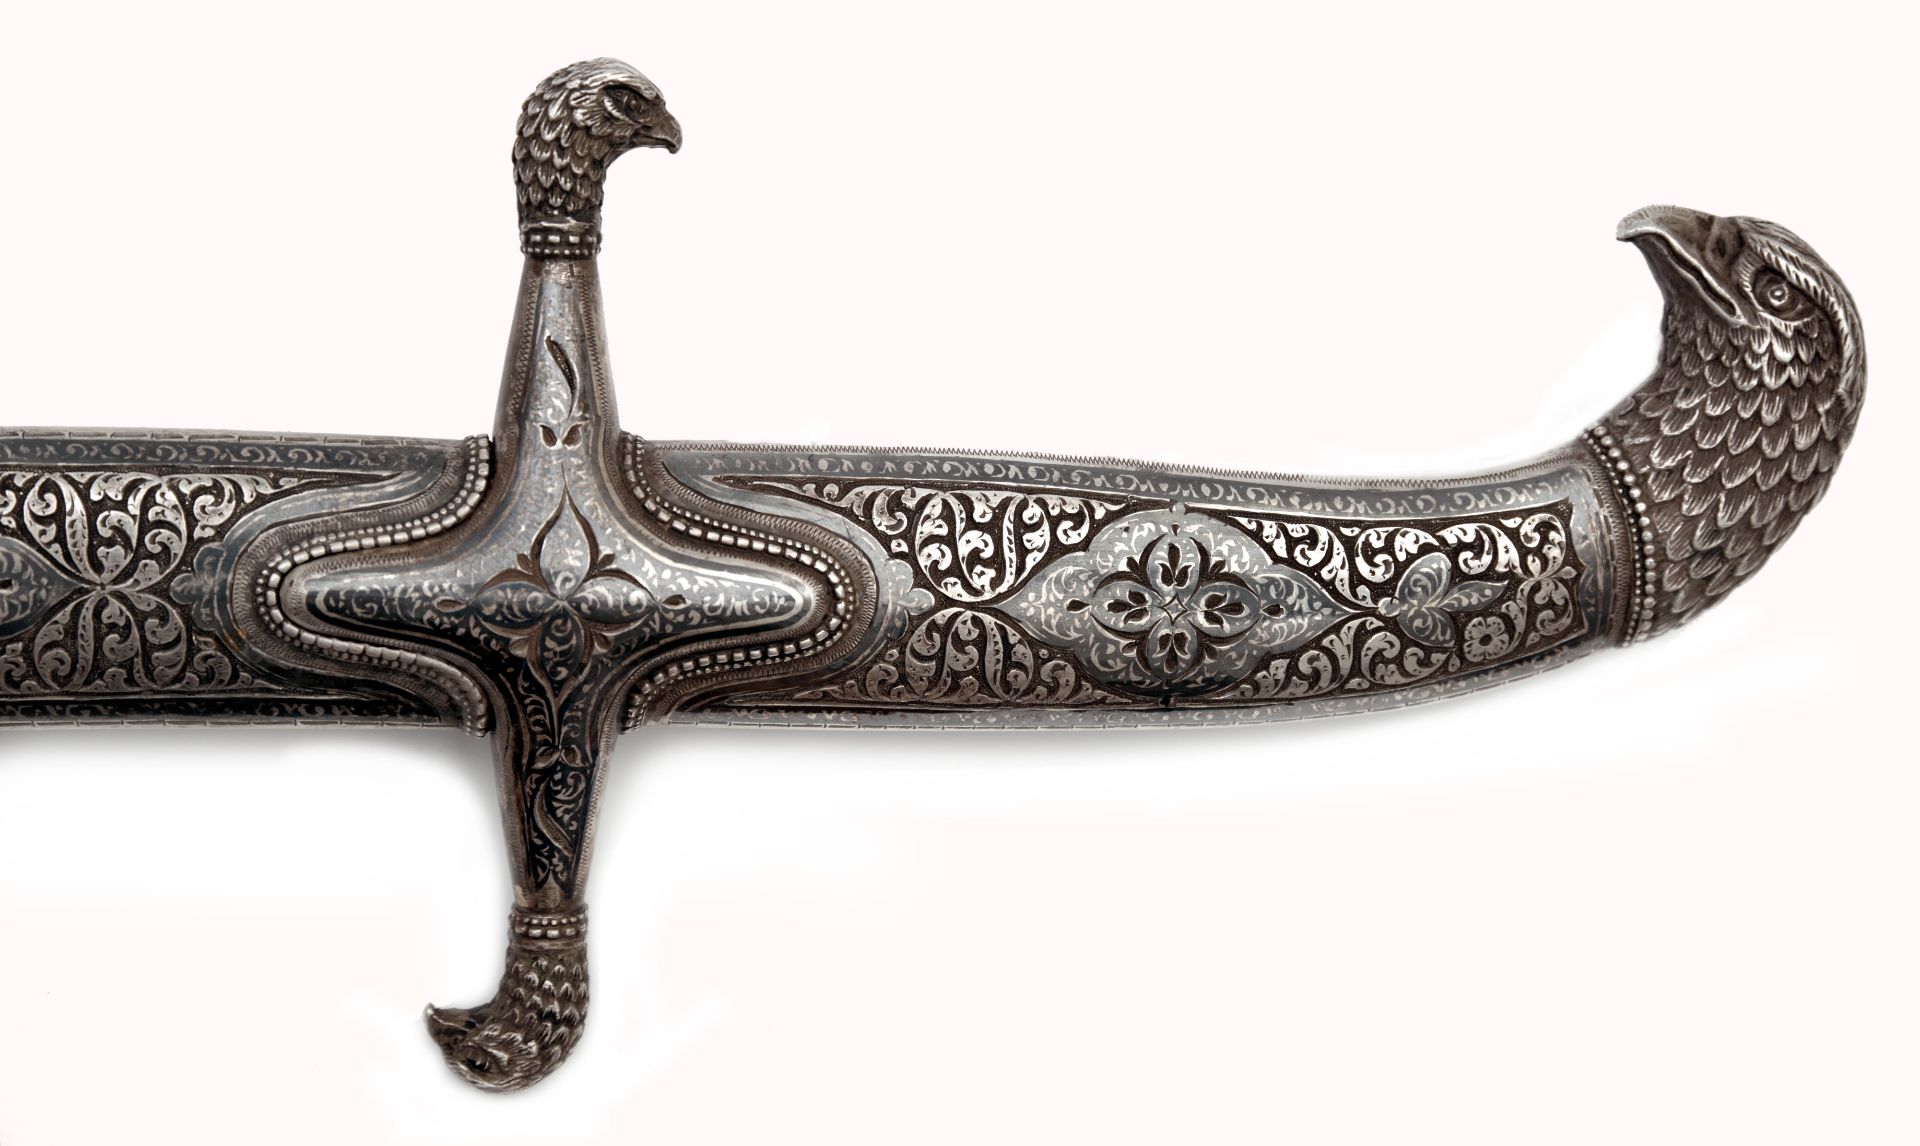 A Fabulous Russian Imperial Presentation Sword in Niello Silver Mounts - Image 5 of 6